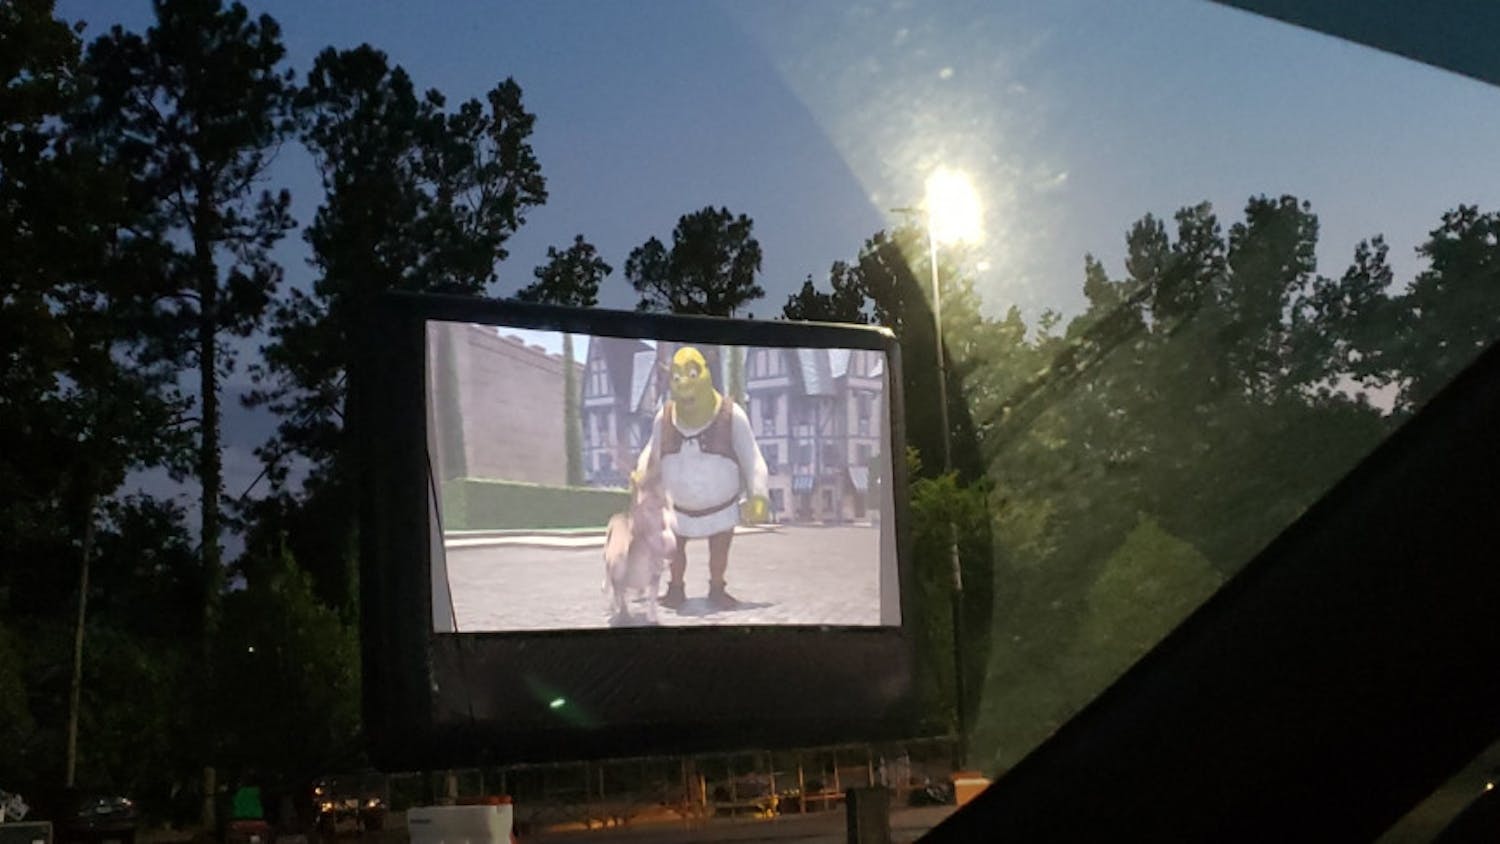 The Oaks Mall is hosting three family-friendly drive-in movie nights in cooperation with Glory Days Presents! and Drive-in Dudes.